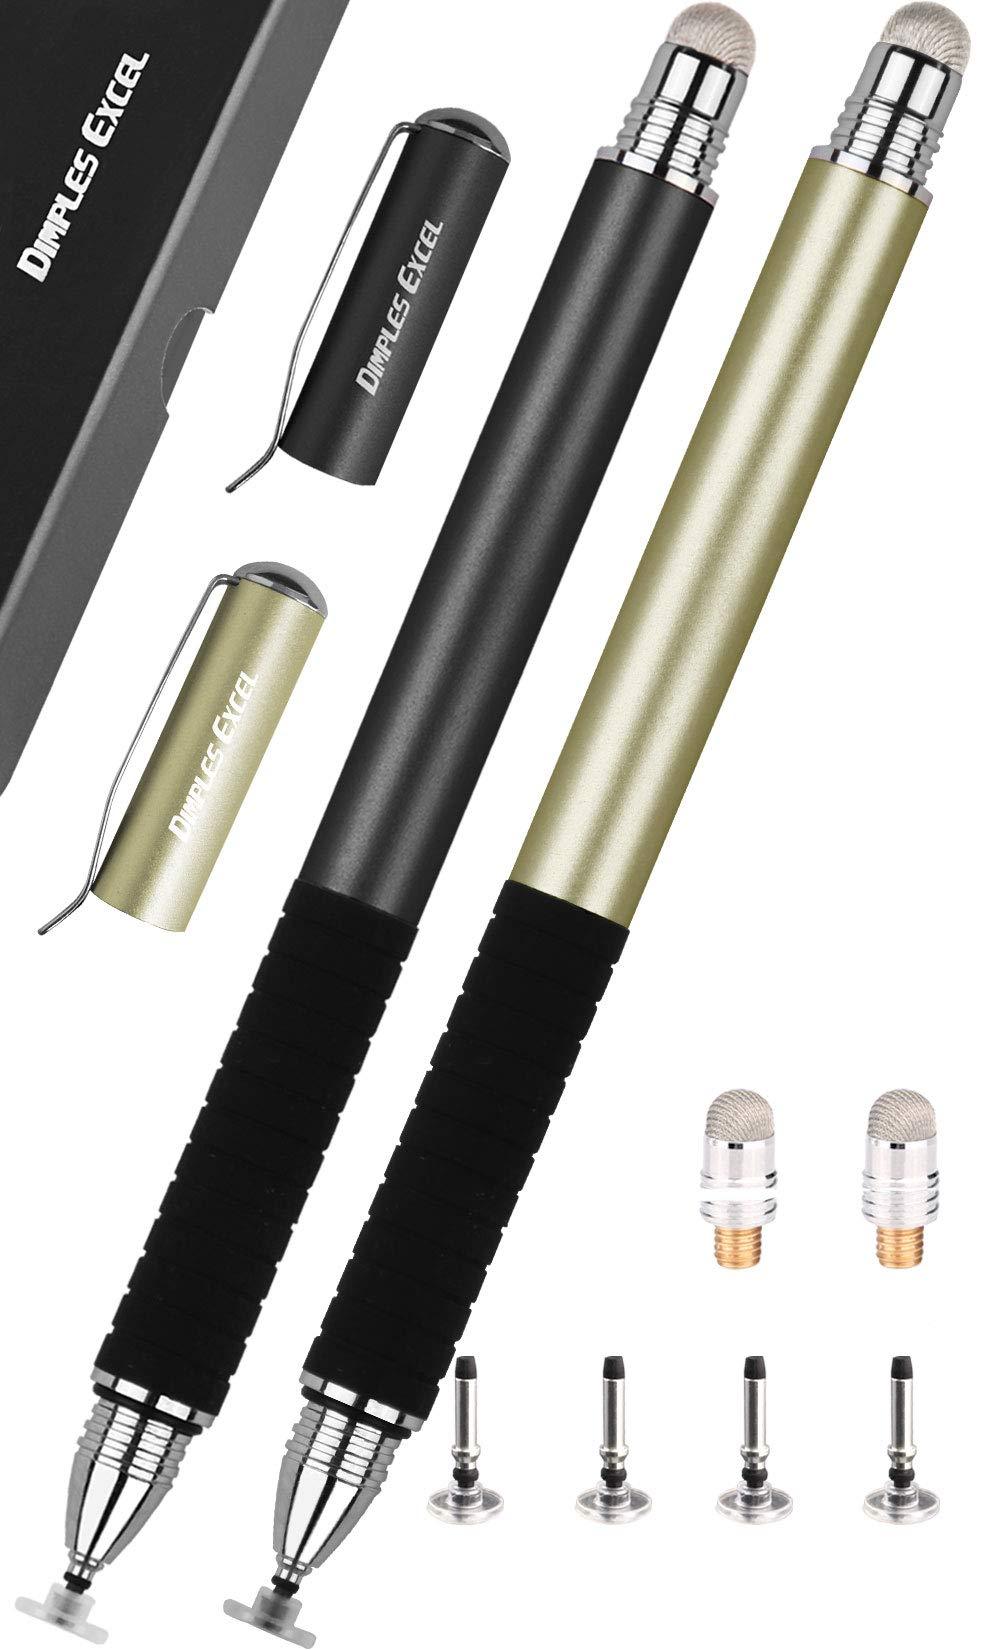 Stylus Pens for Touch Screens Stylus for iPad Stylus Pen for Tablet (Jet Black+Luxury Gold) Jet Black+Luxury Gold